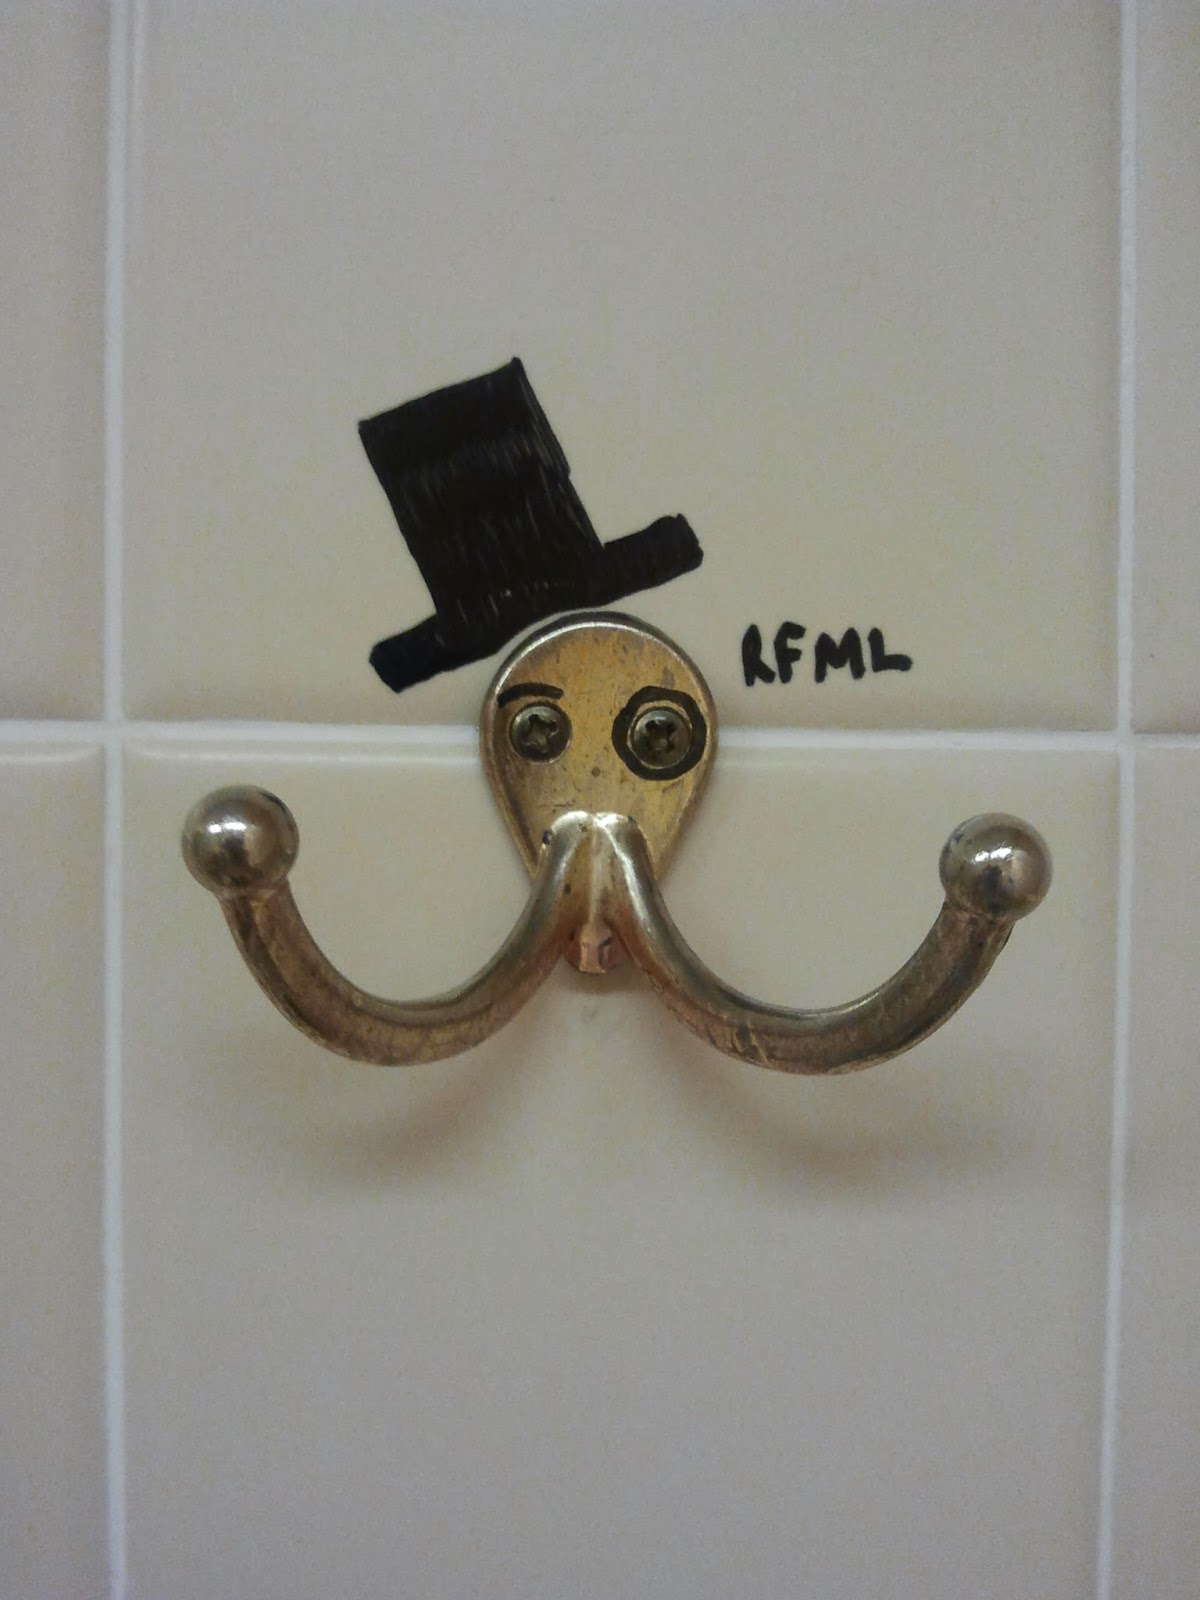 This coat hanger looks like a drunk octopus who wants to fight :  r/mildlyinteresting